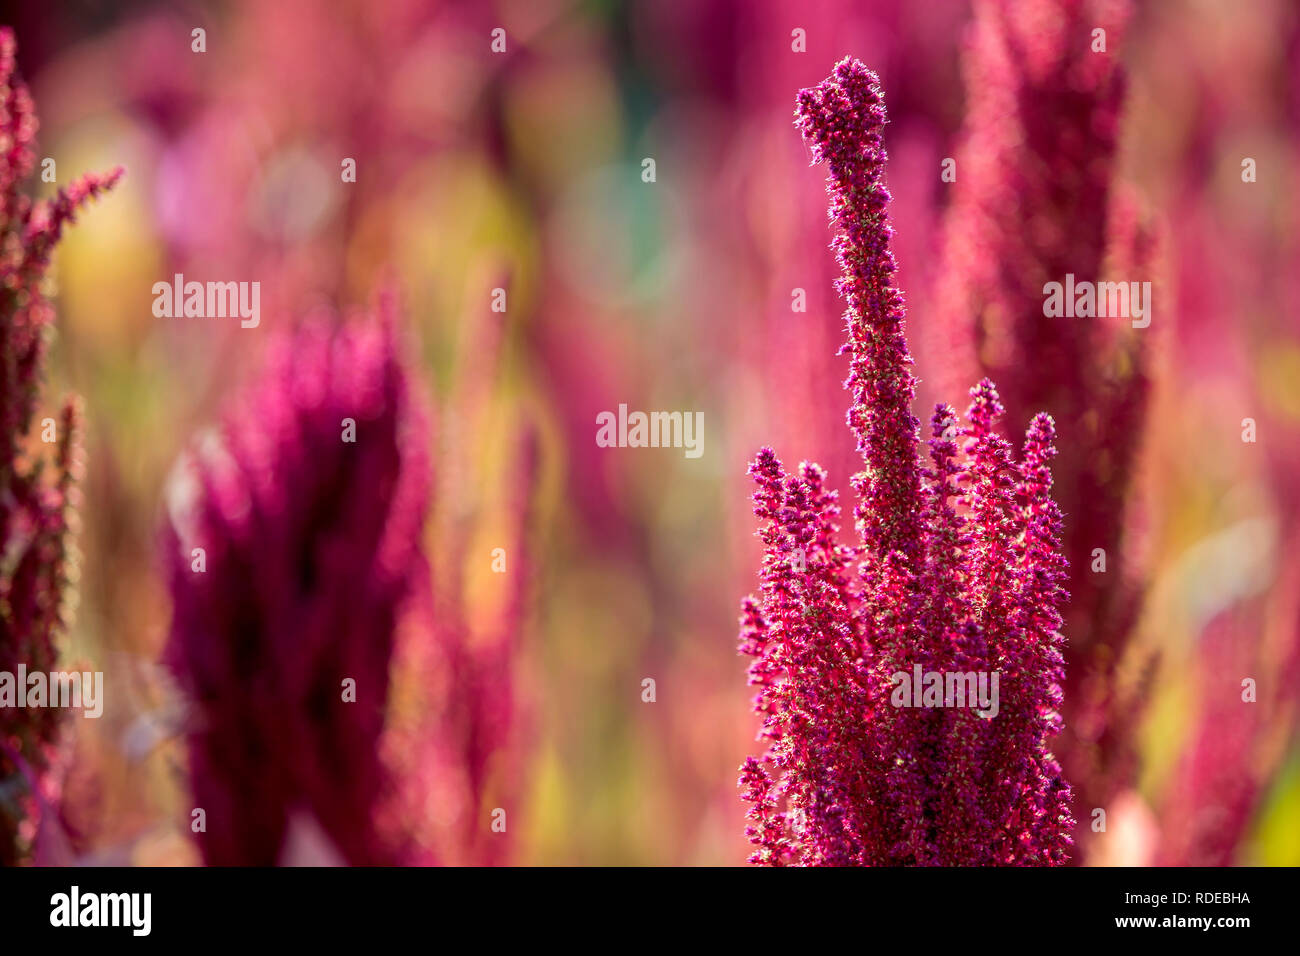 Isolated Indian red and green amaranth plant lit by sun on blurred blooming field and bright green bokeh background. Leaf vegetable, cereal and orname Stock Photo